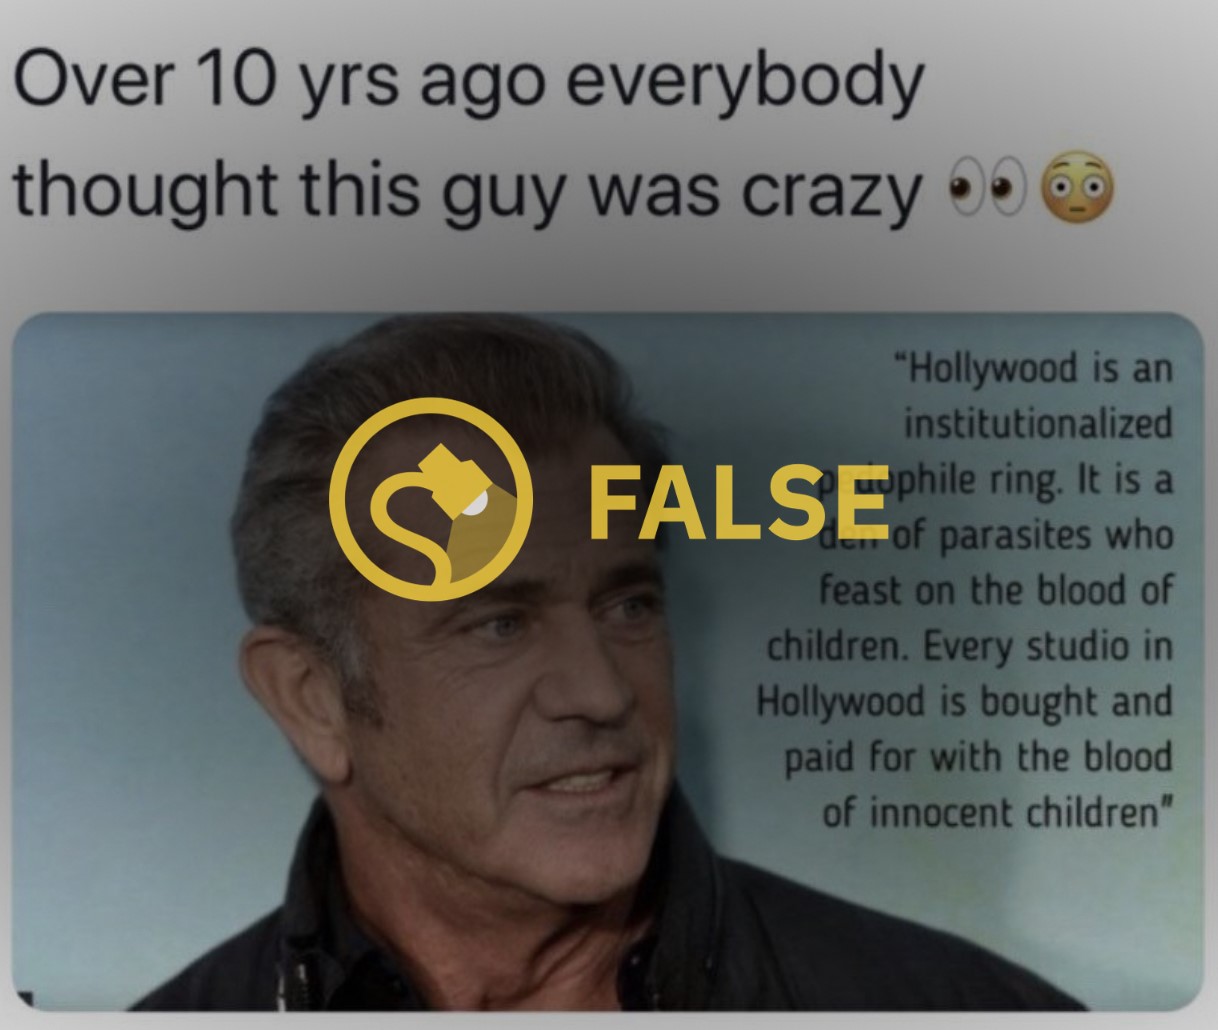 Mel Gibson fake quote: Hollywood is an institutionalized pedophile ring. 